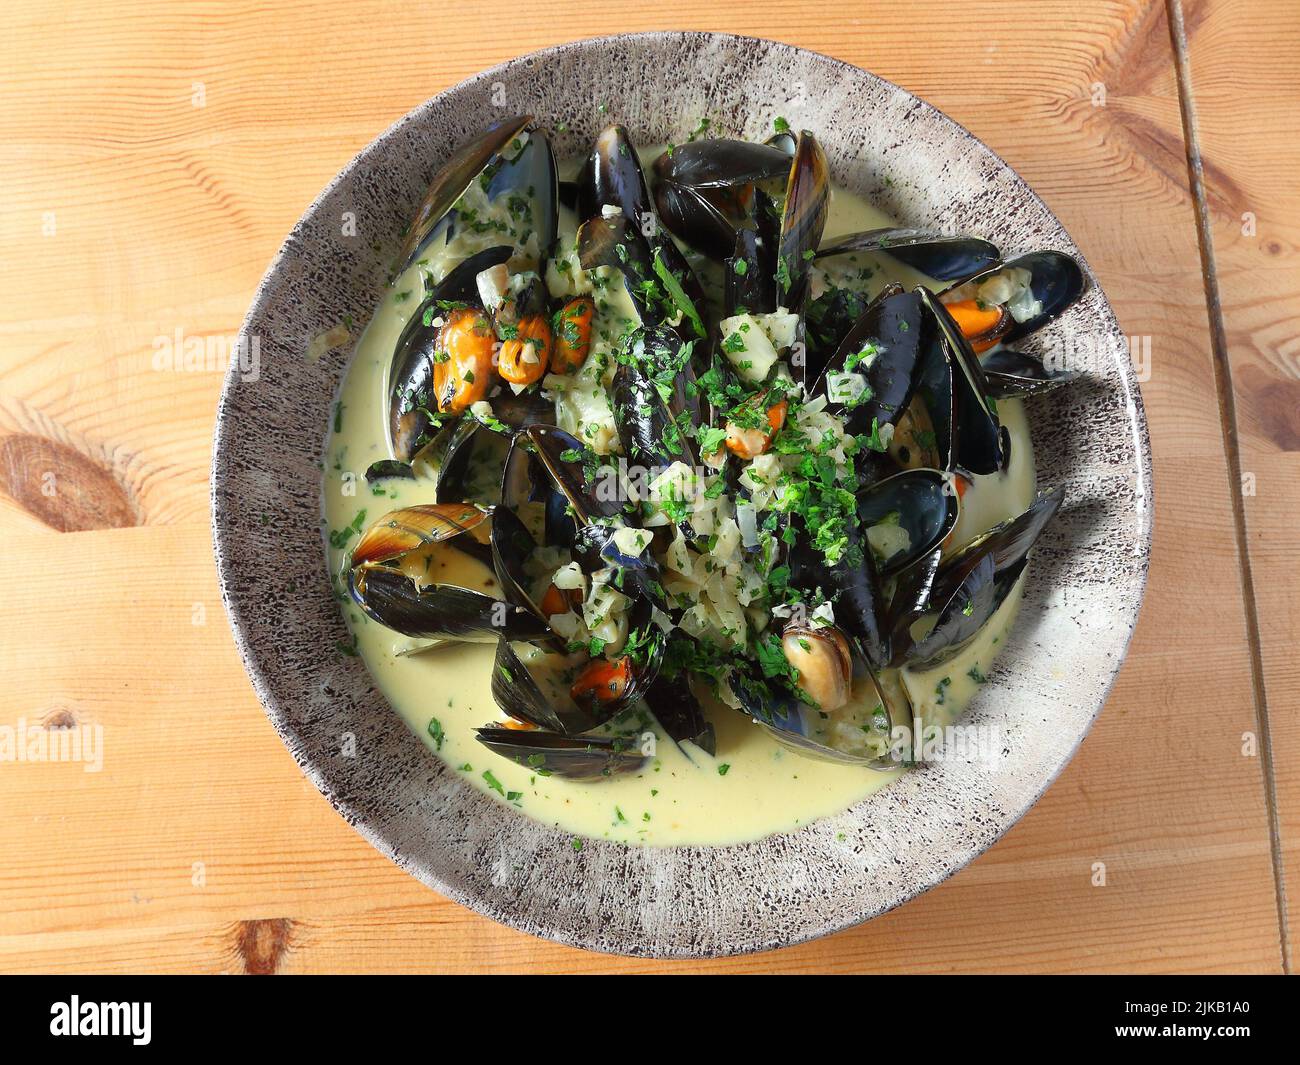 Cooked mussels in a cream sauce presented in a dish Stock Photo